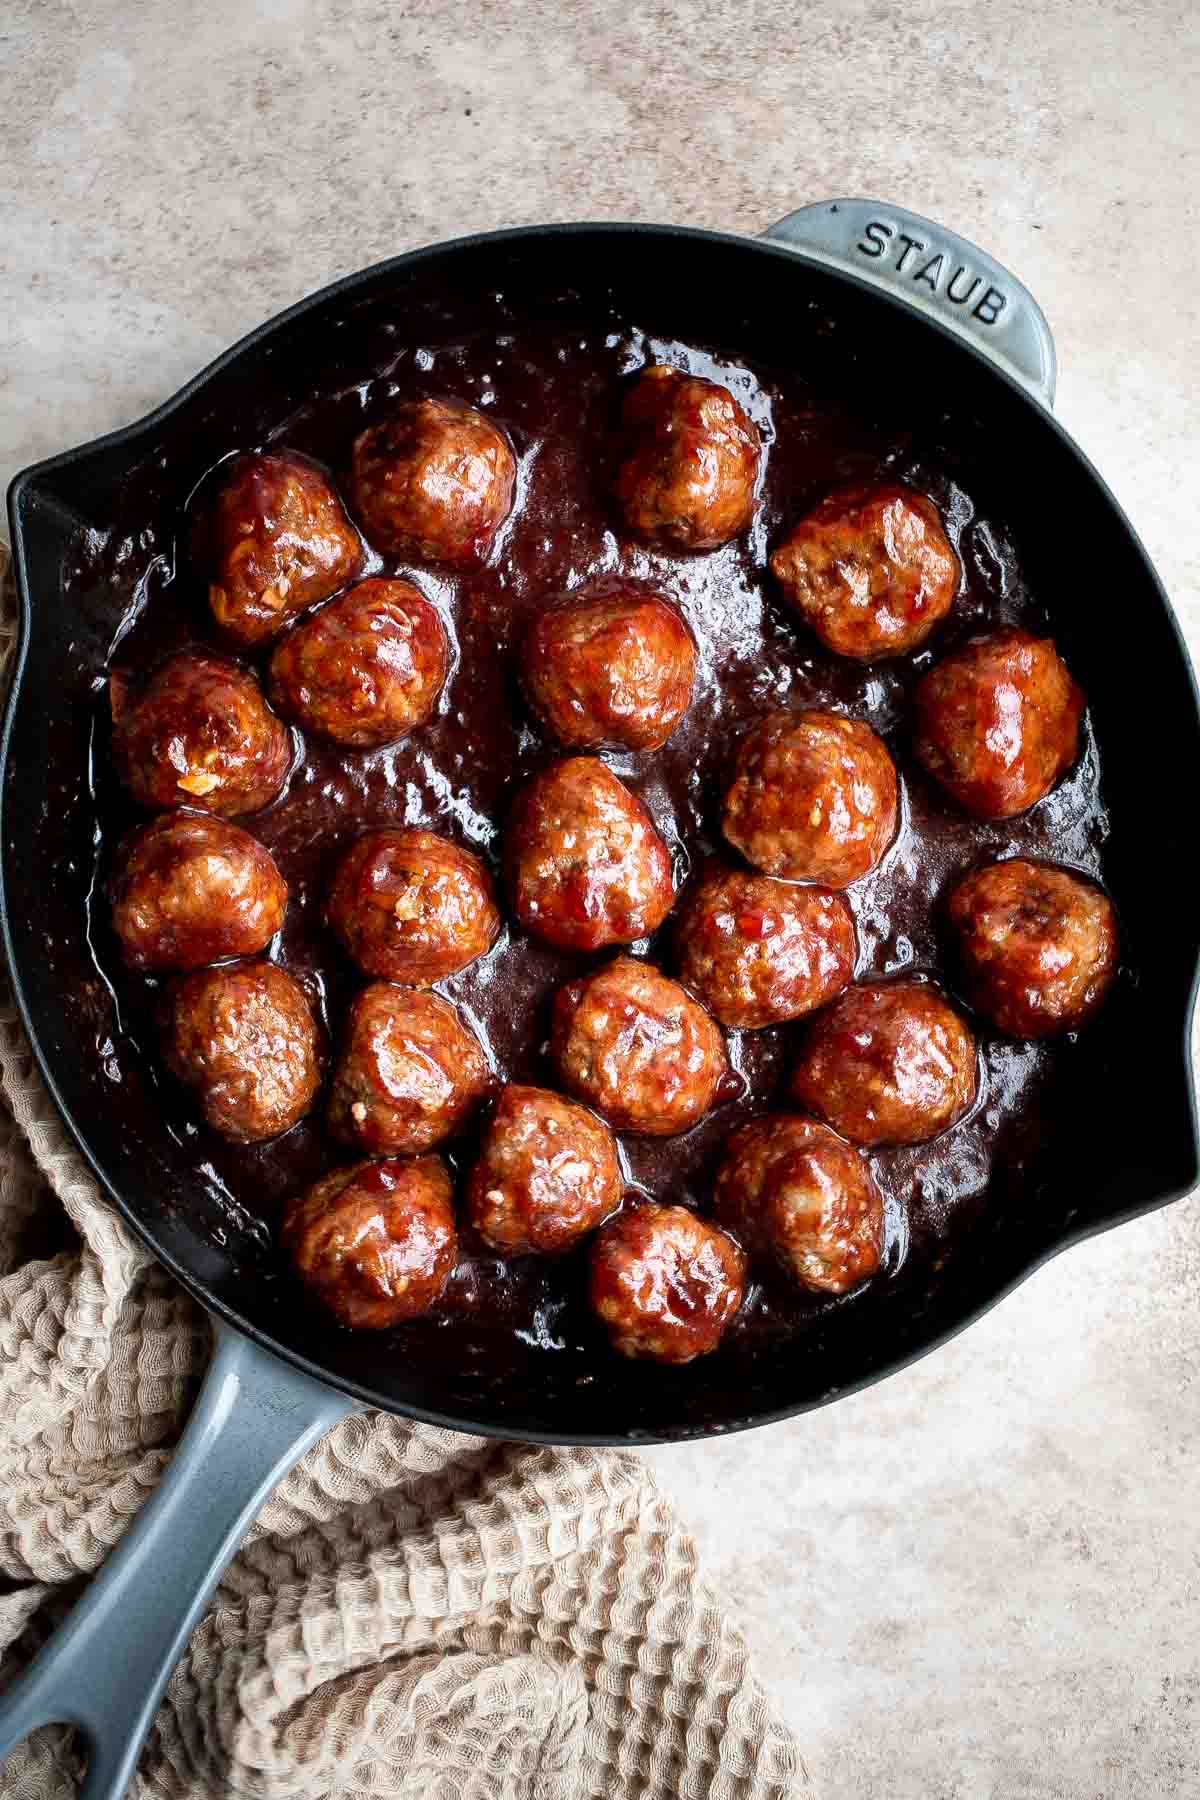 Cranberry Meatballs are sticky, sweet and tangy. These delicious bites are the perfect holiday appetizer, or a great way to use up leftover cranberry sauce. | aheadofthyme.com